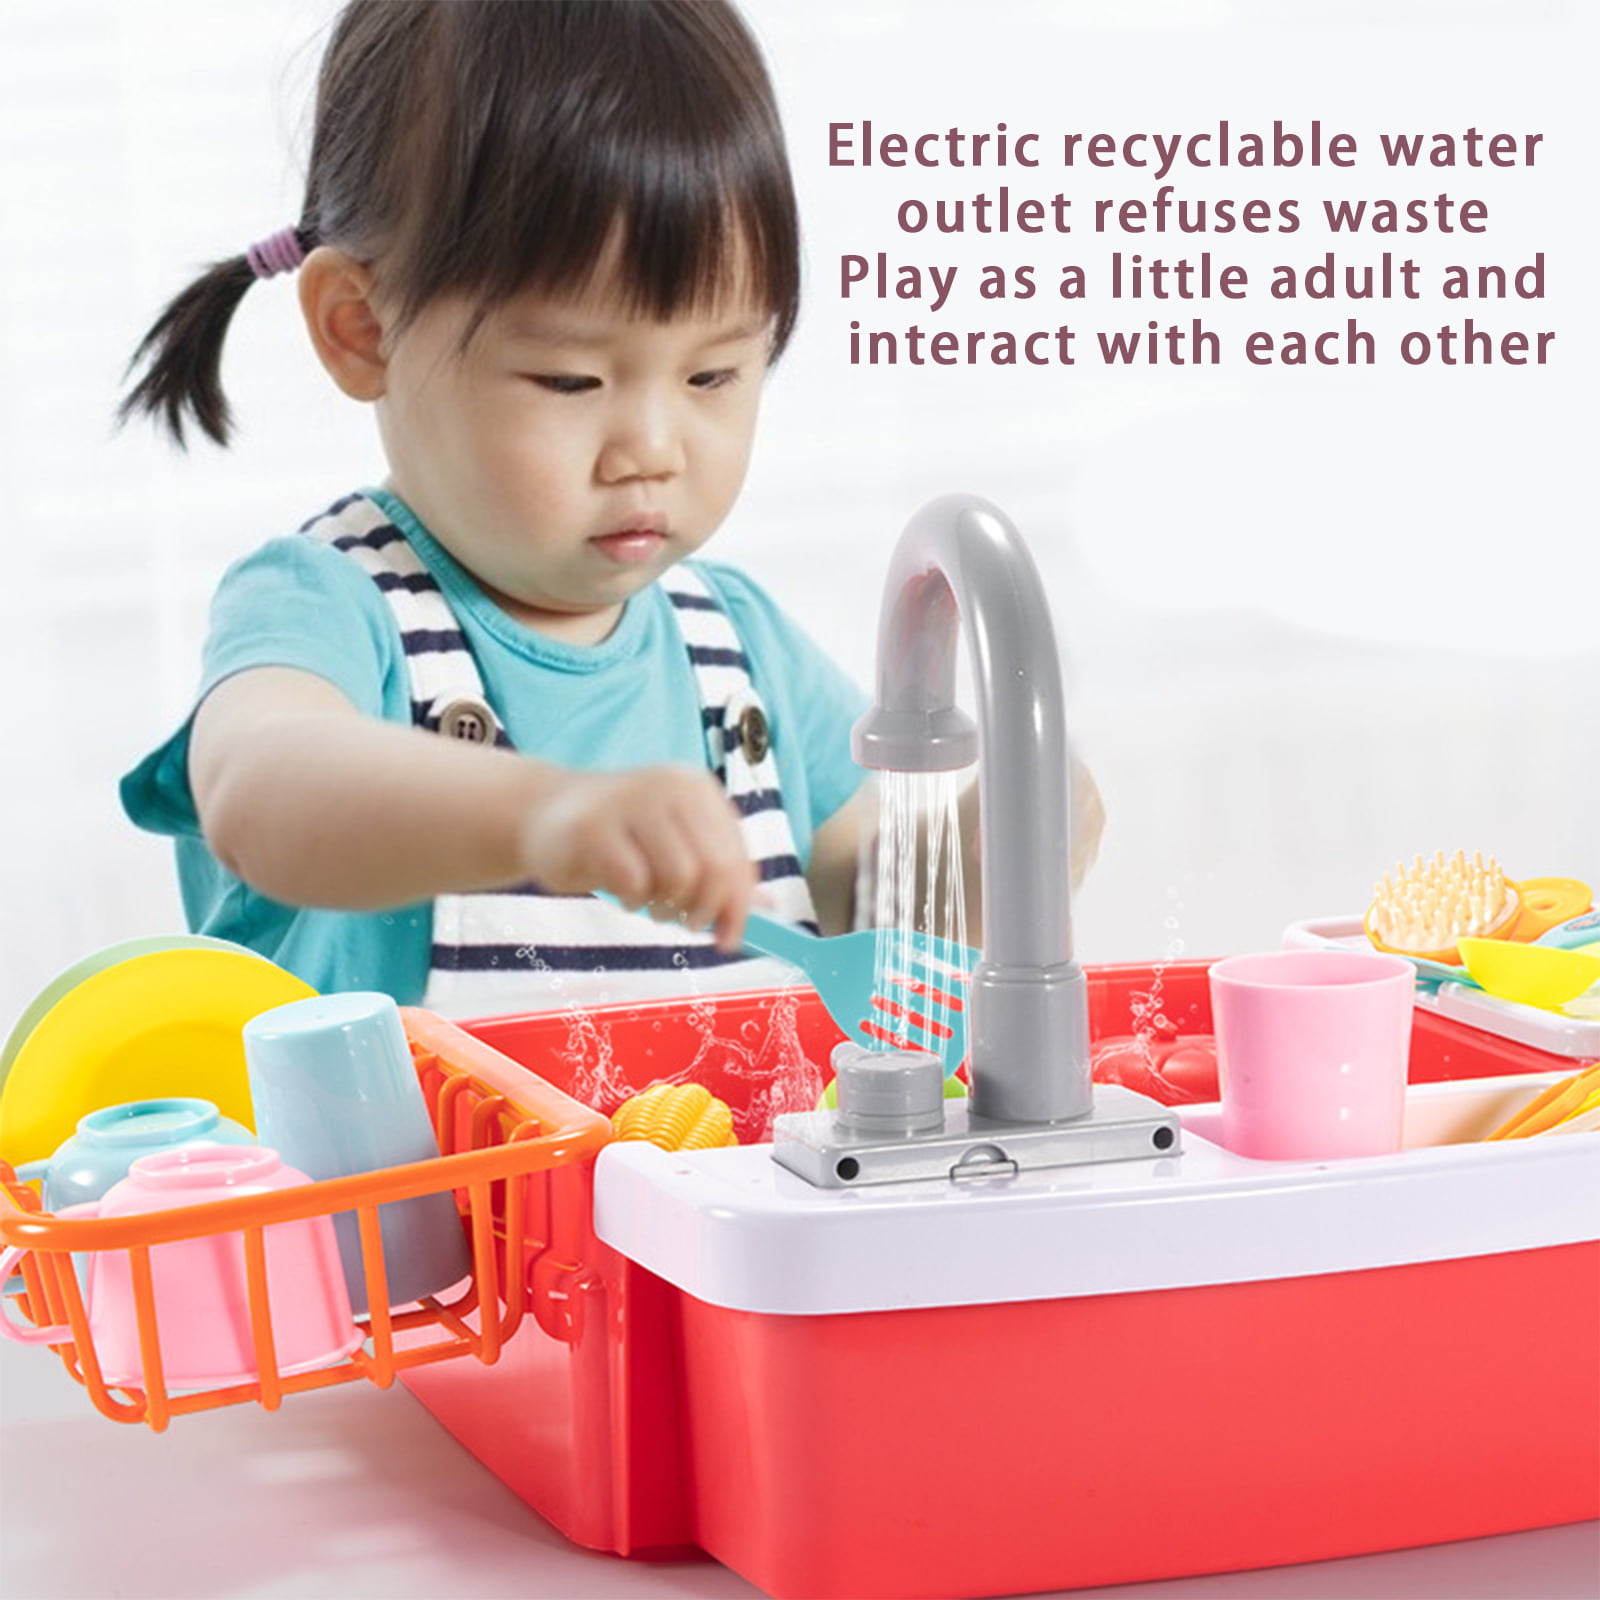  Foxswov Kitchen Play Sink Toys, Fun & Educative Kids Toy Sink,  Electric Dishwasher Playing Toy with Running Water for Toddler - 20 Piece  Pretend Play Toy for Boys and Girls 